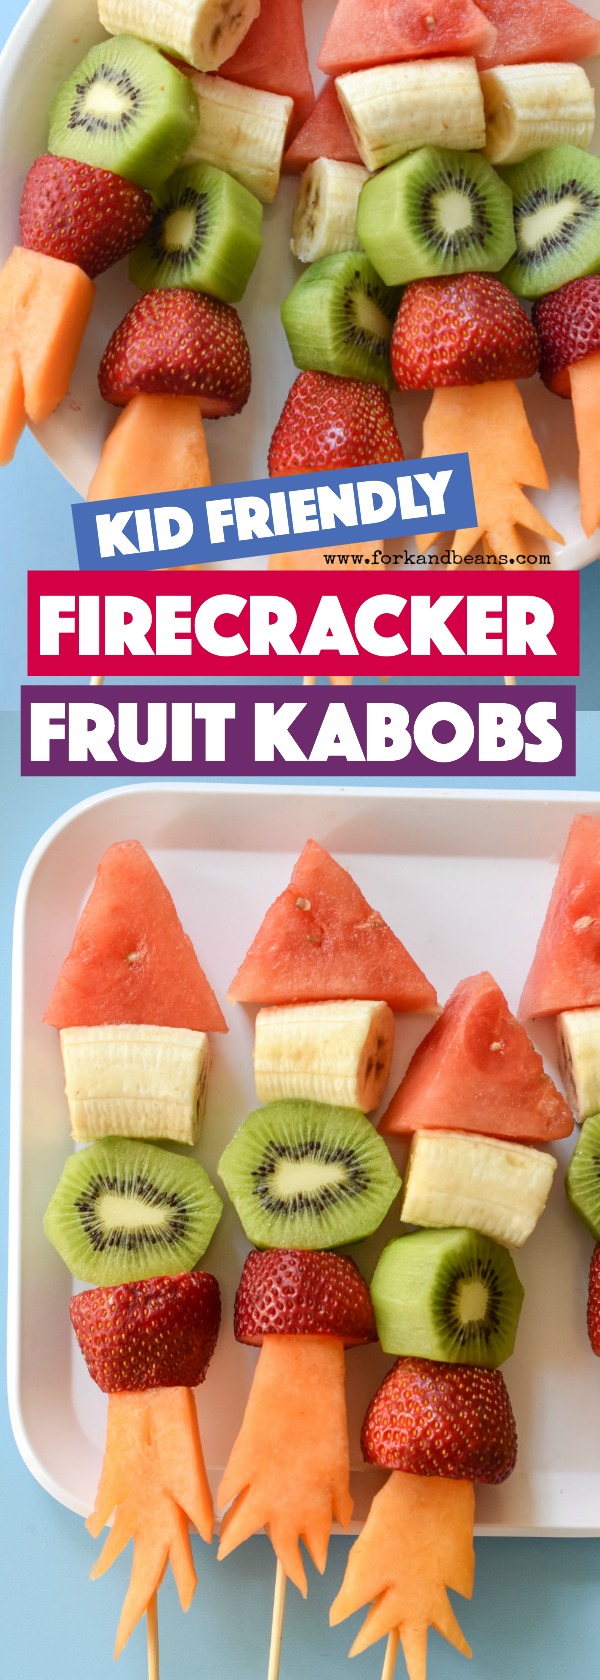 Keep your kids safe, healthy, and entertained this summer with these DIY Firecracker Fruit Kabobs!